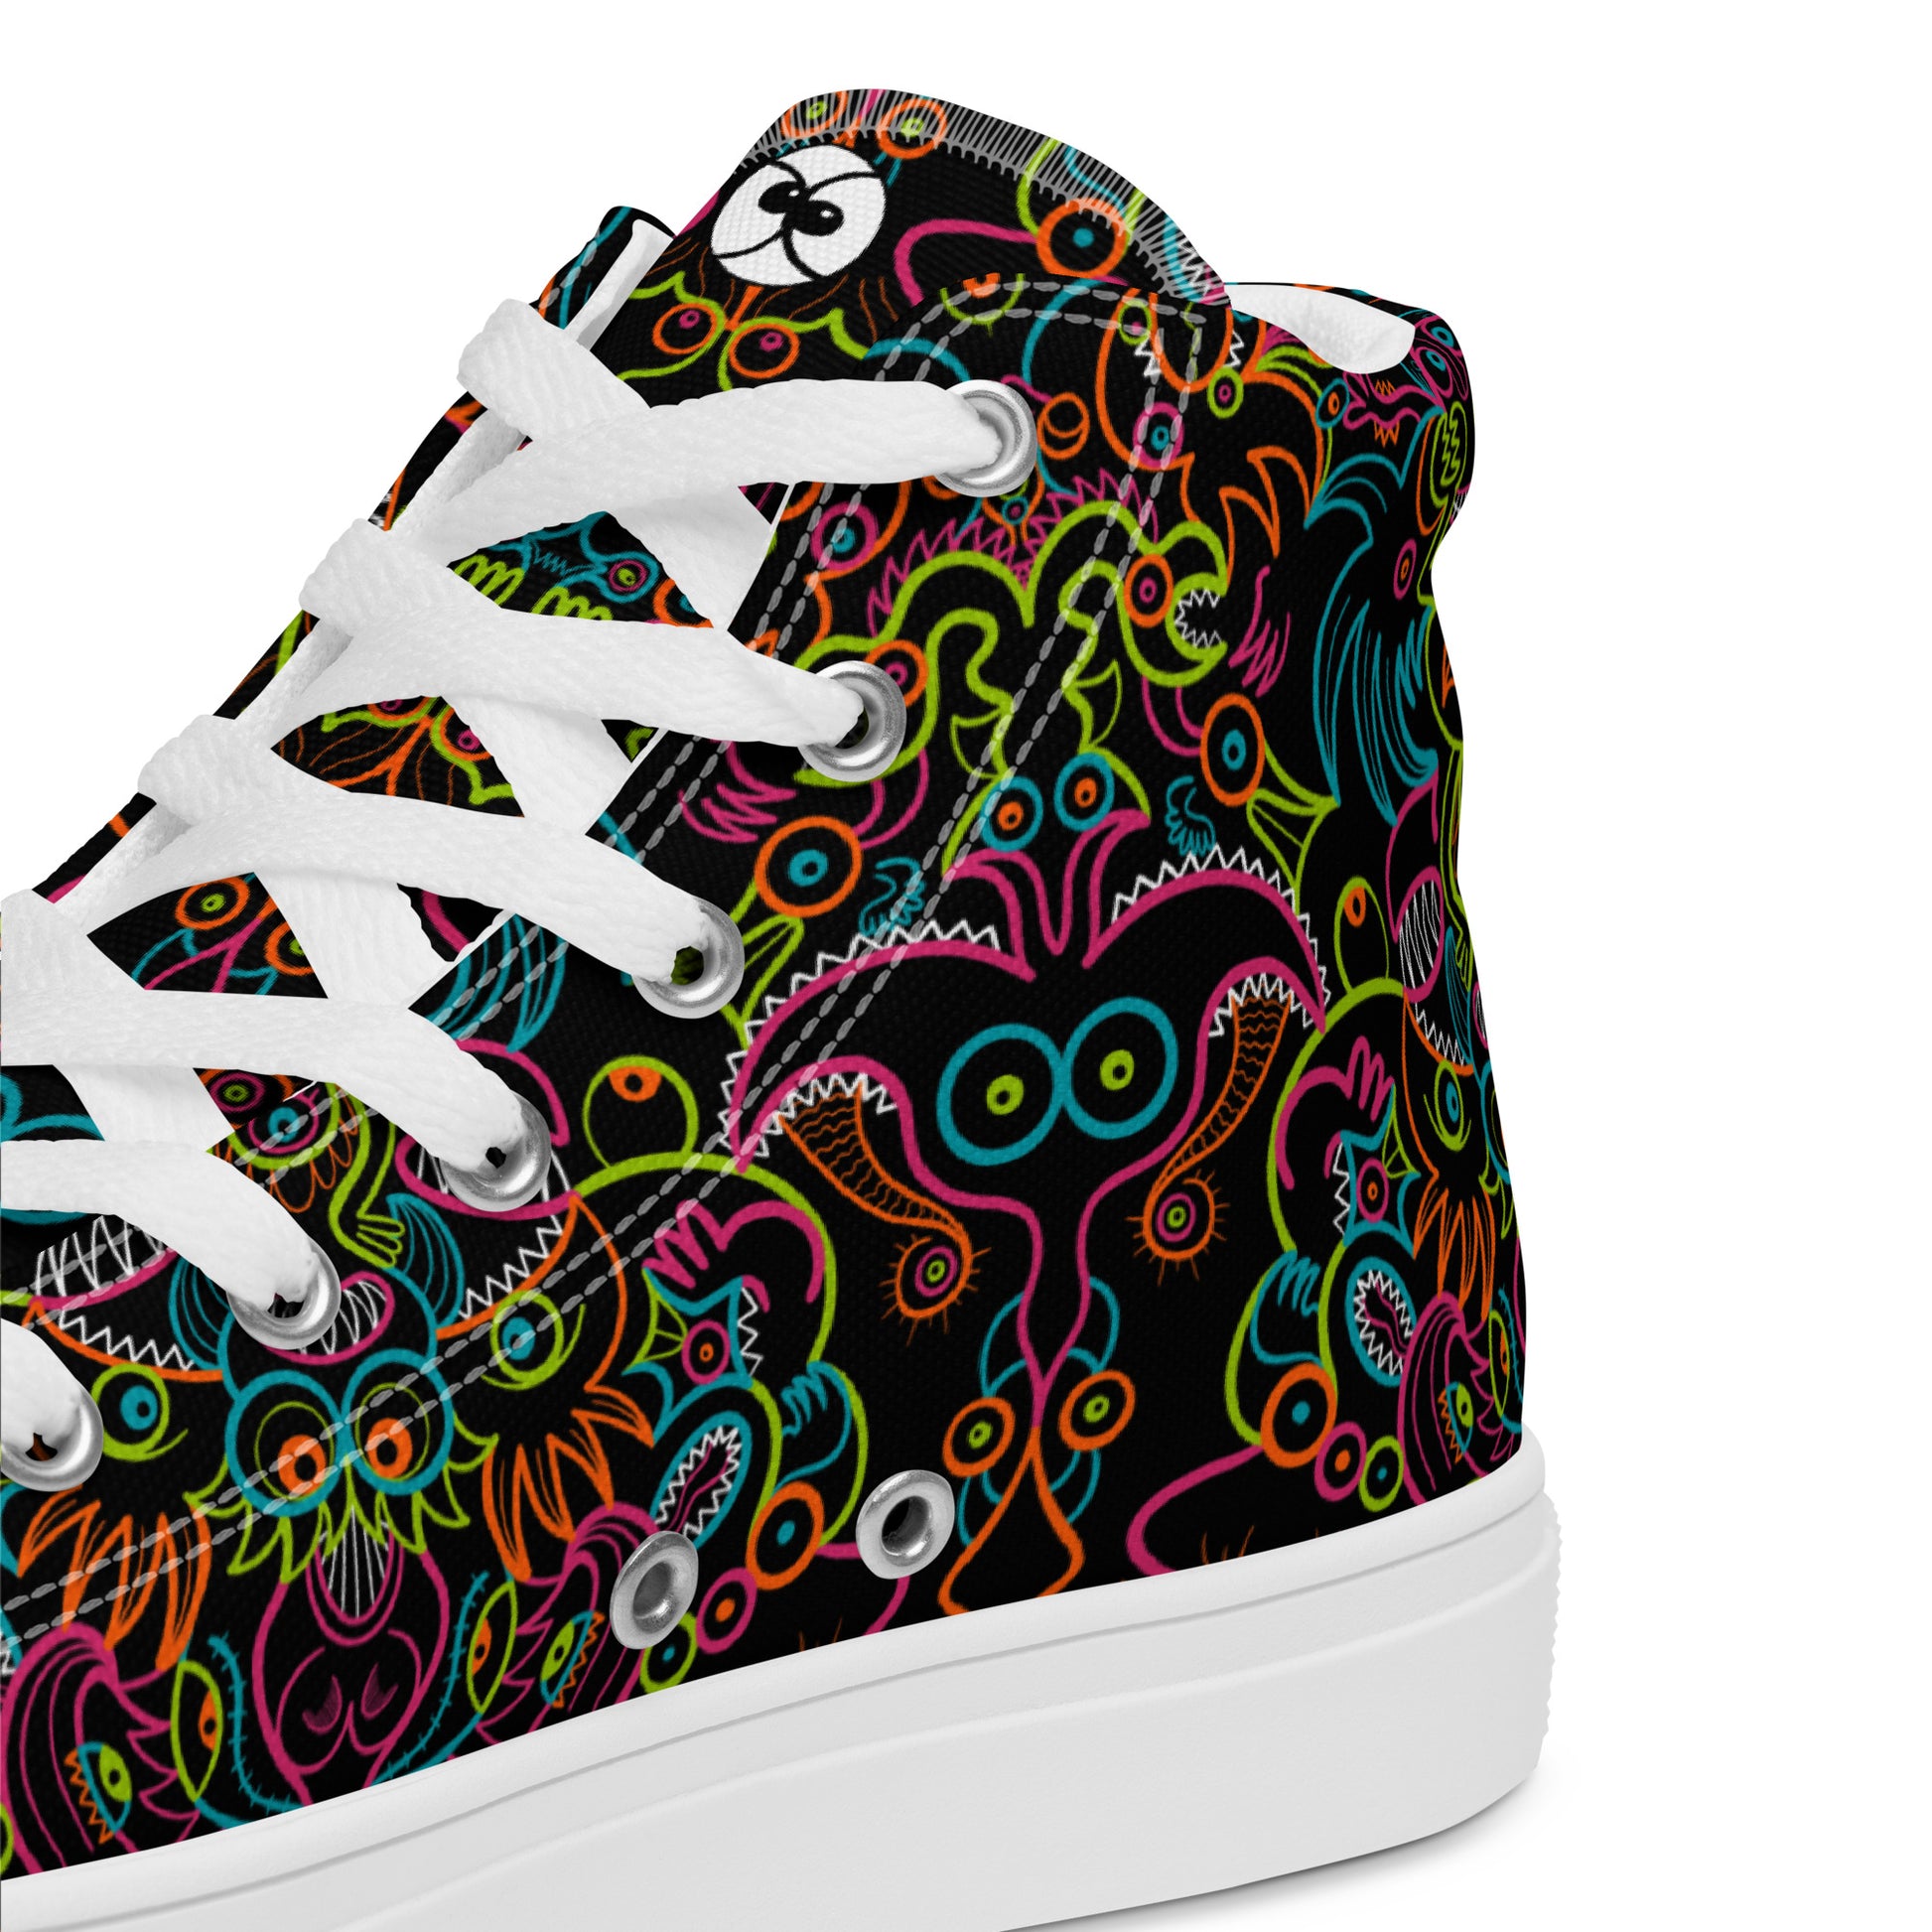 Doodle Carnival: A Kaleidoscope of Whimsical Wonders! - Women’s high top canvas shoes. White color. Product details